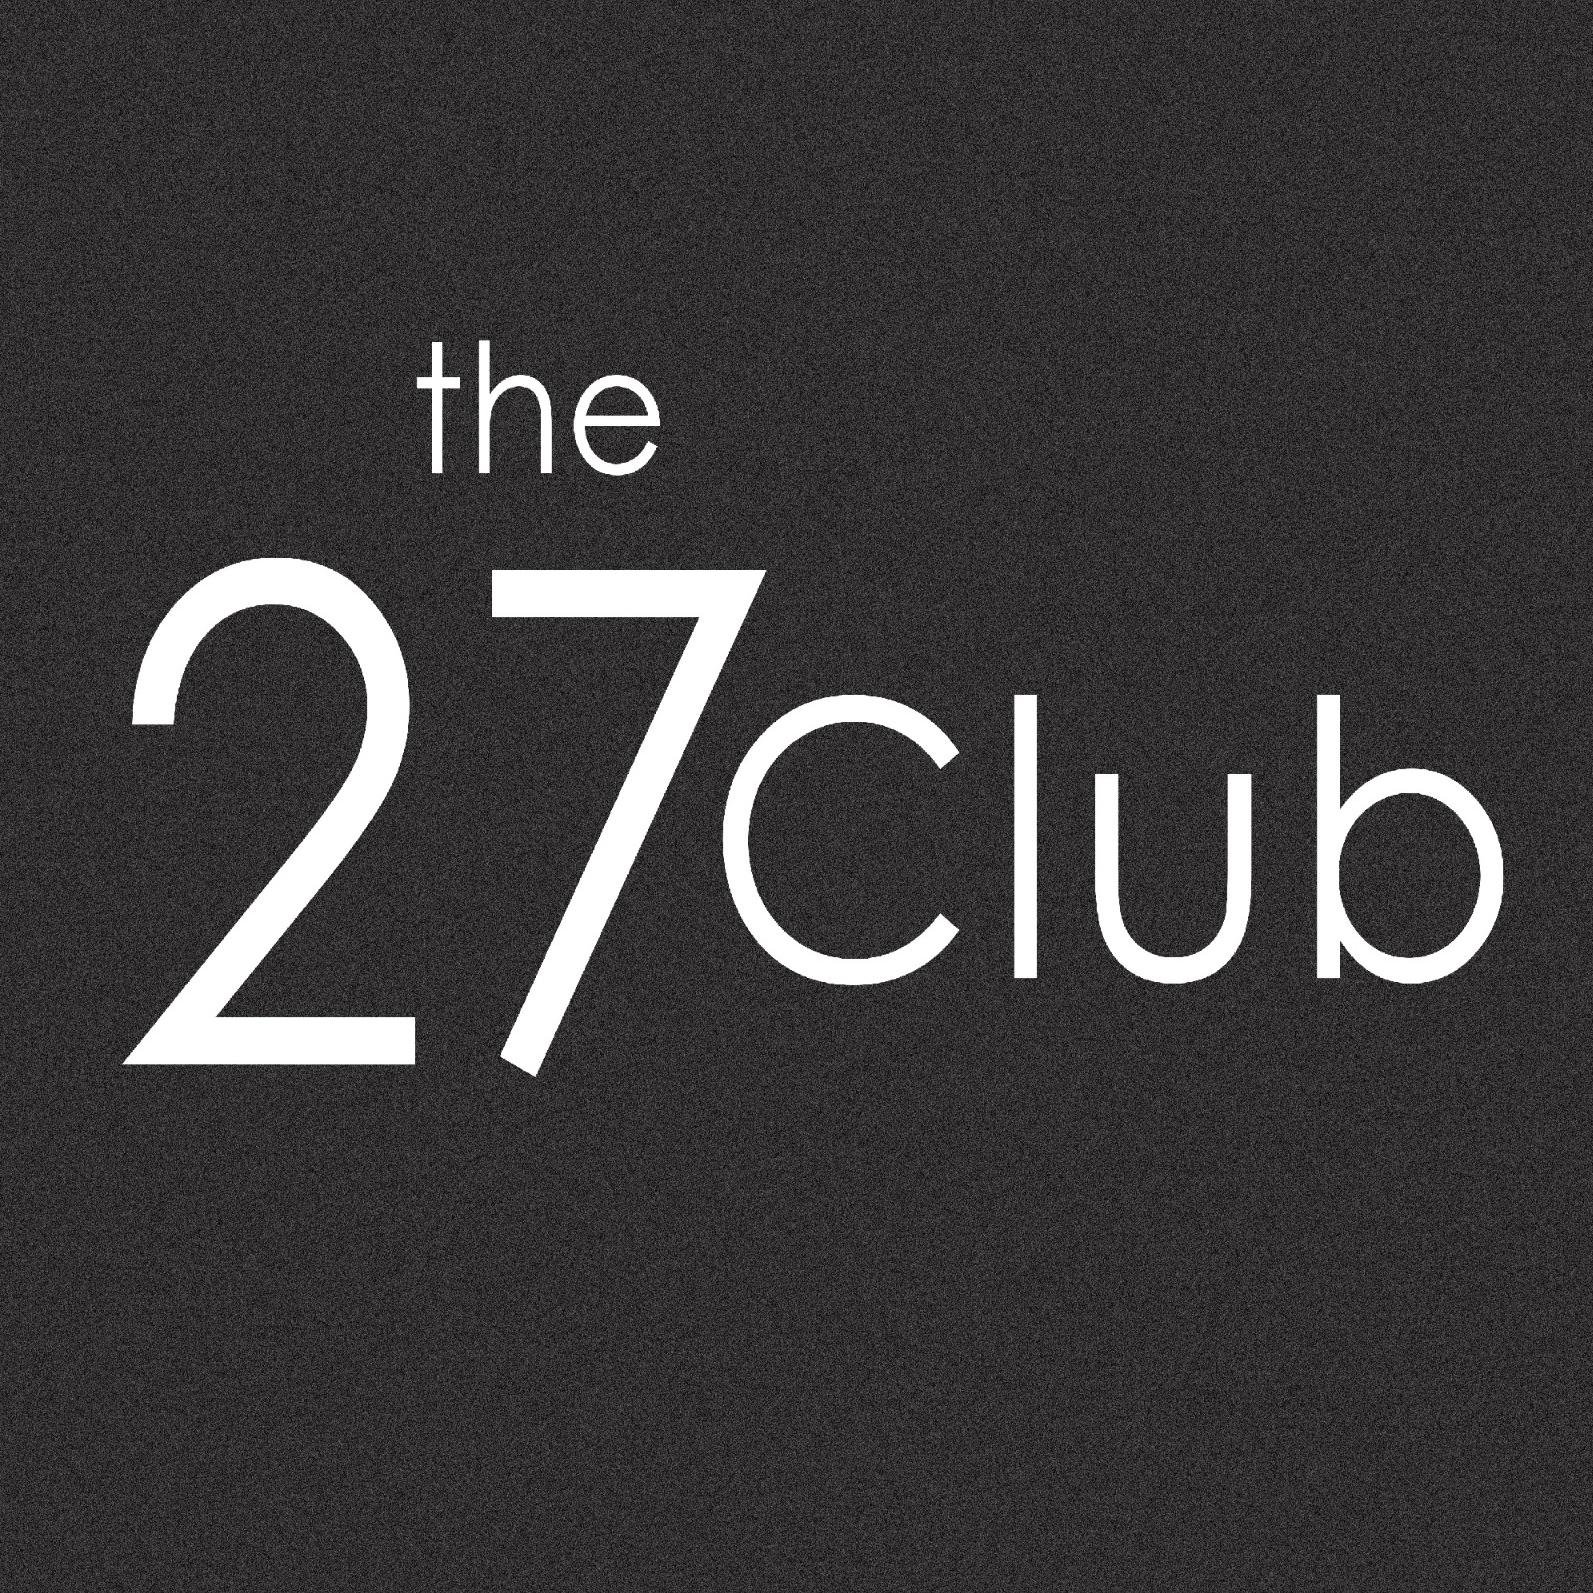 The official twitter page for the upcoming black comedy short film The 27 Club.